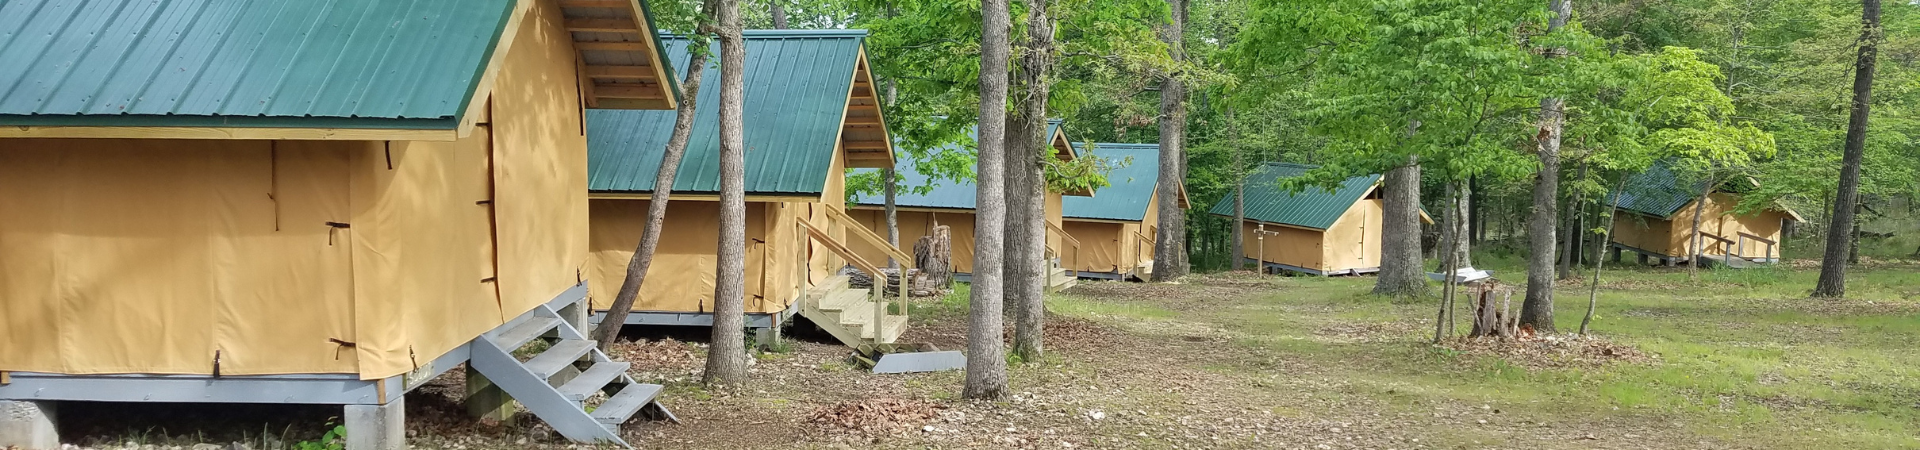  a row of platform tents at Camp NOARK girl scout property 